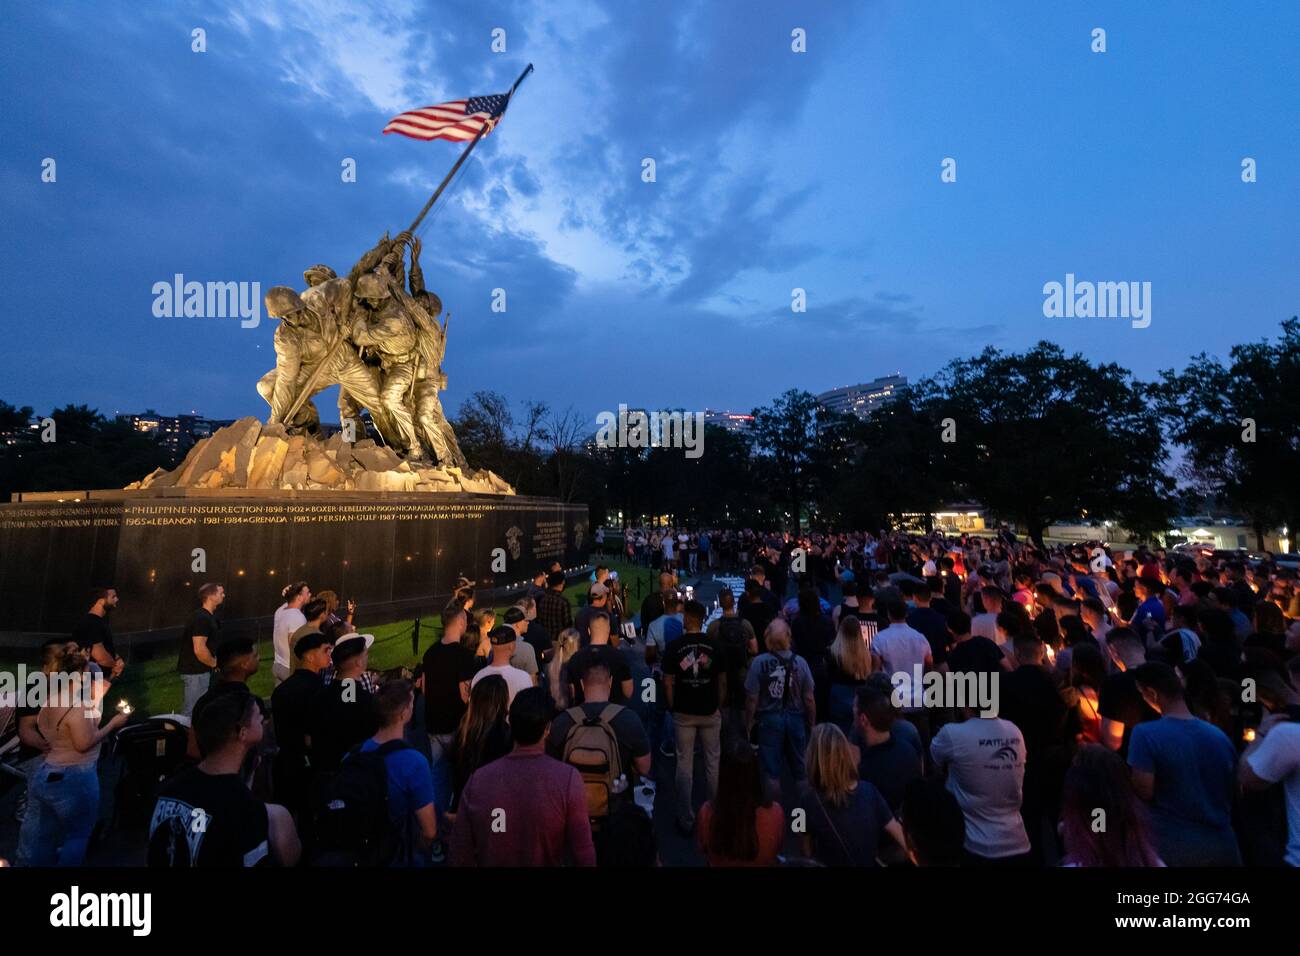 A large group of people gather at the United States Marine Corps War Memorial for a candlelight vigil, Saturday, Aug. 28, 2021, in memory of the 11 Marines, one Navy Corpsman and one U.S. Army Soldier who lost their lives on Aug. 26, 2021, during an attack in Kabul, Afghanistan. (U.S. Marine Corps photo by Staff Sgt. Kelly L. Timney) Stock Photo